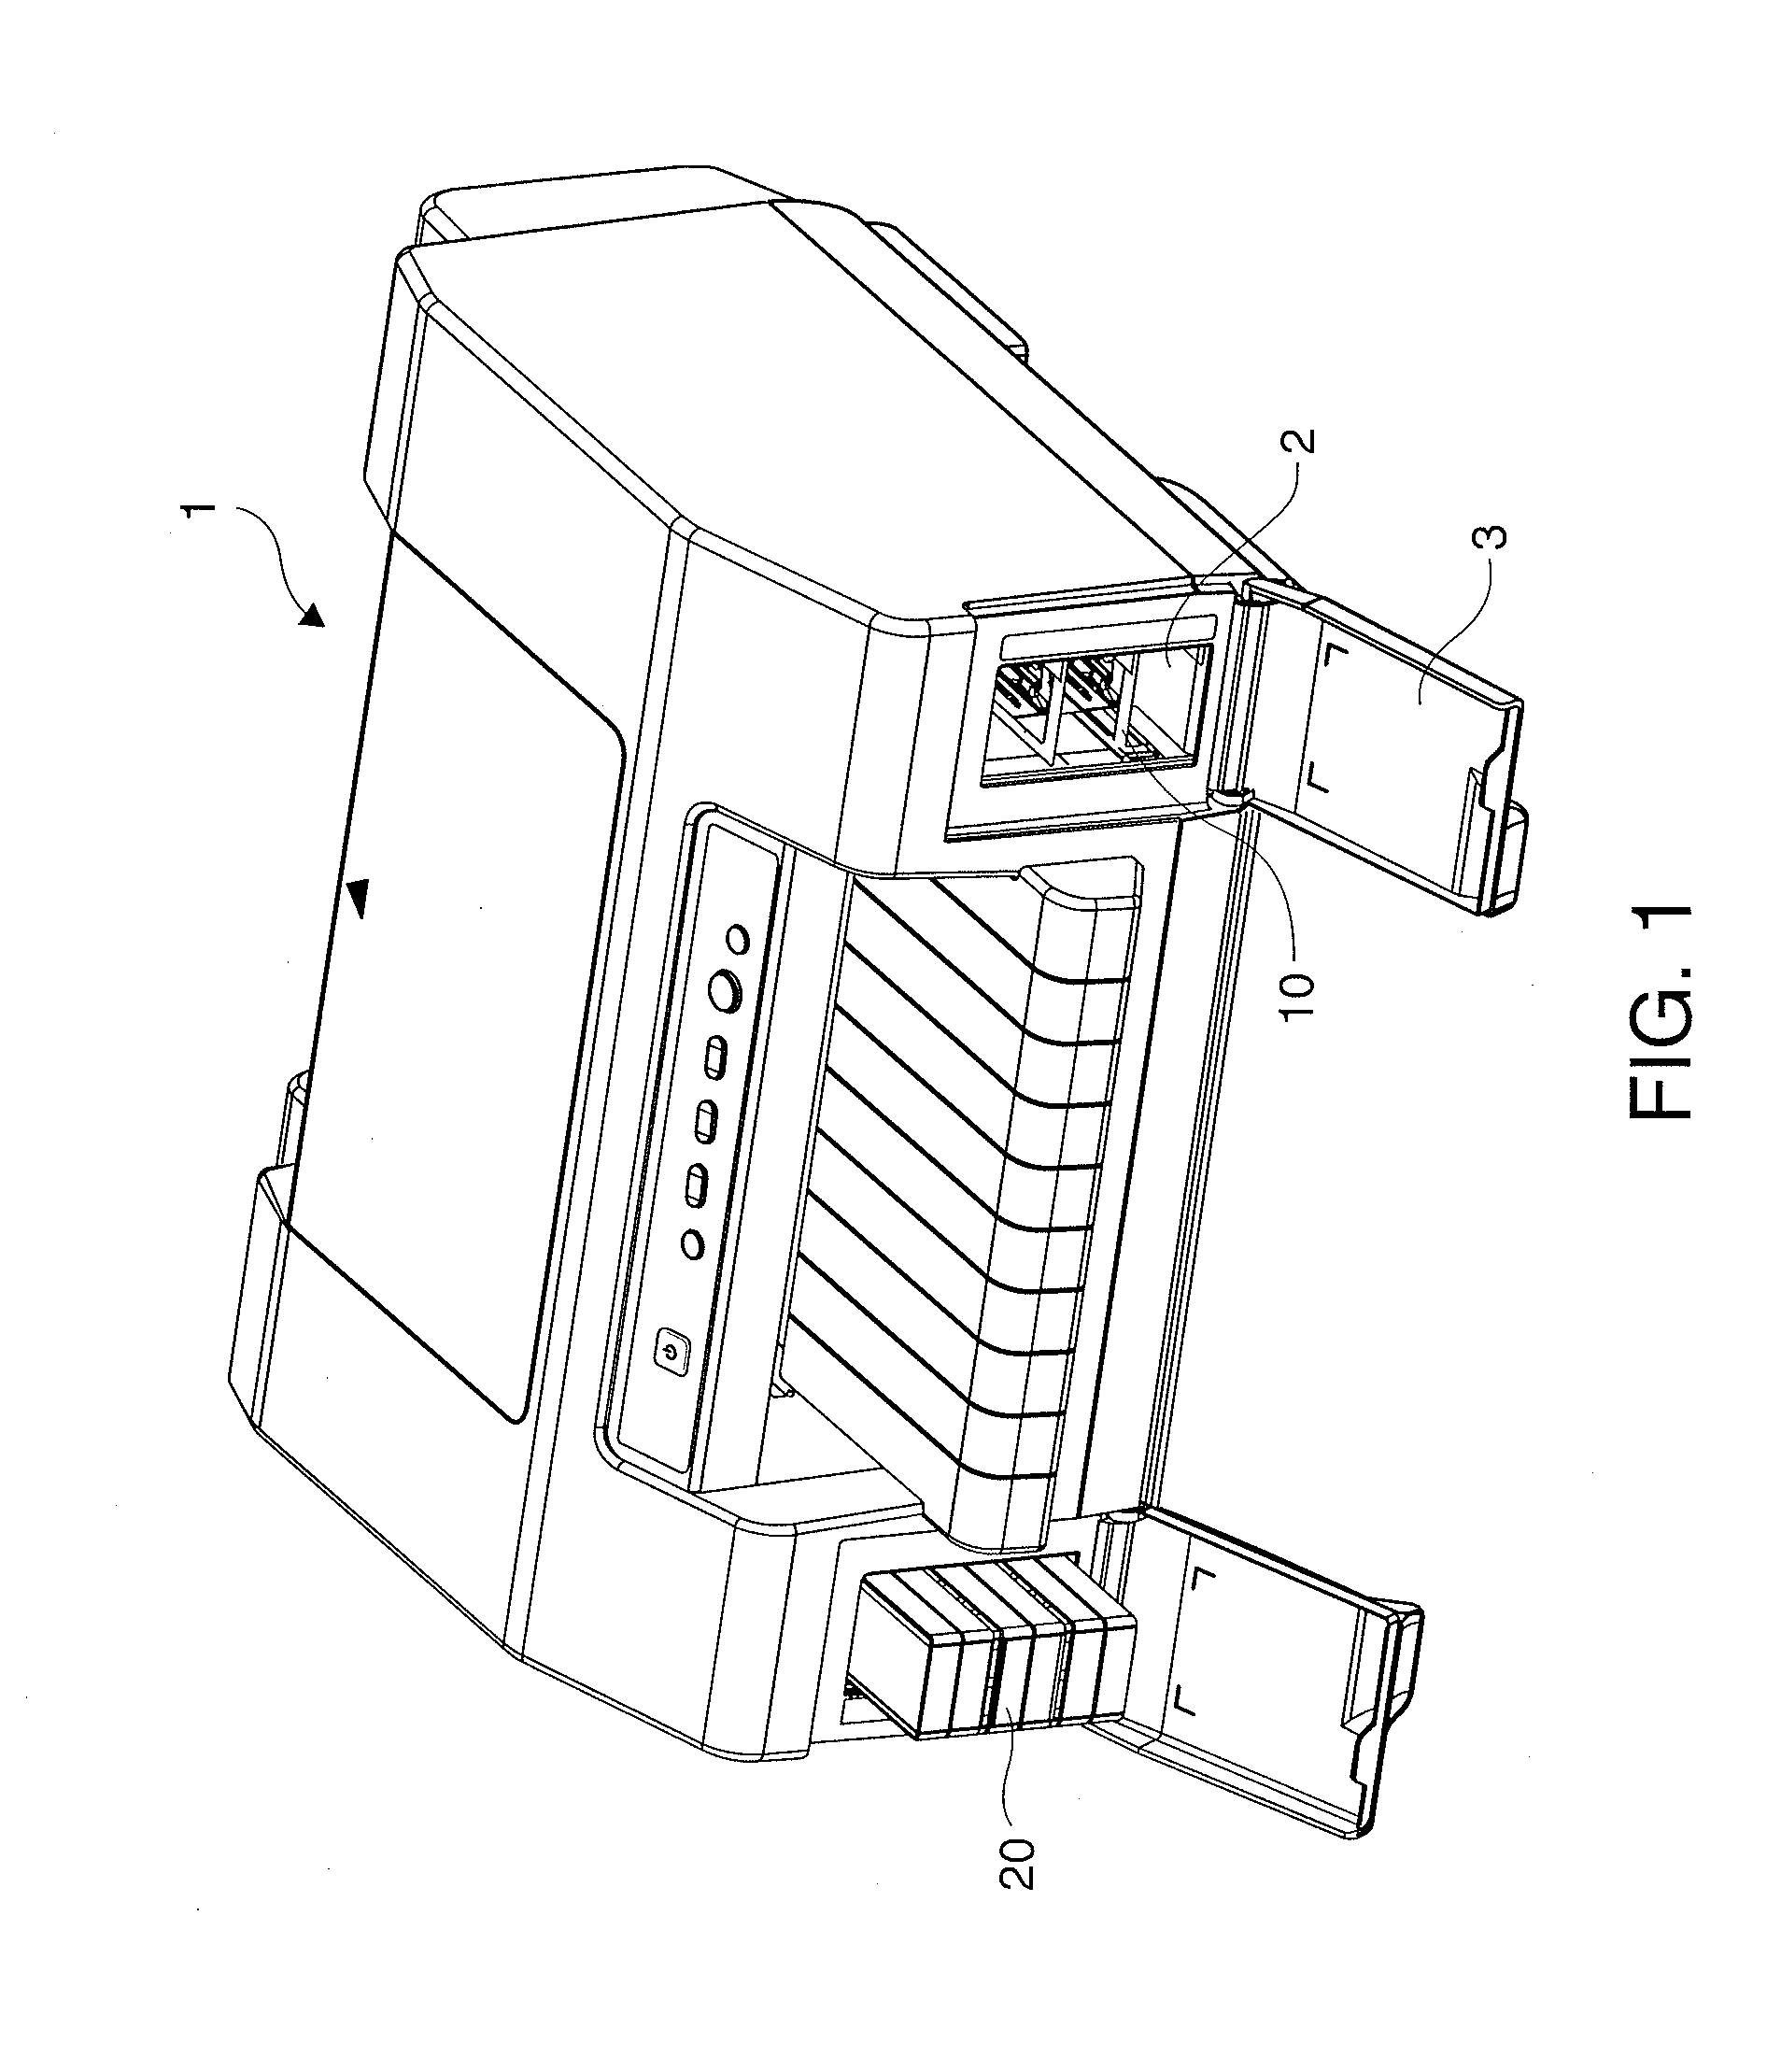 Ink cartridge assembly, cartridge assembly kit, and printer